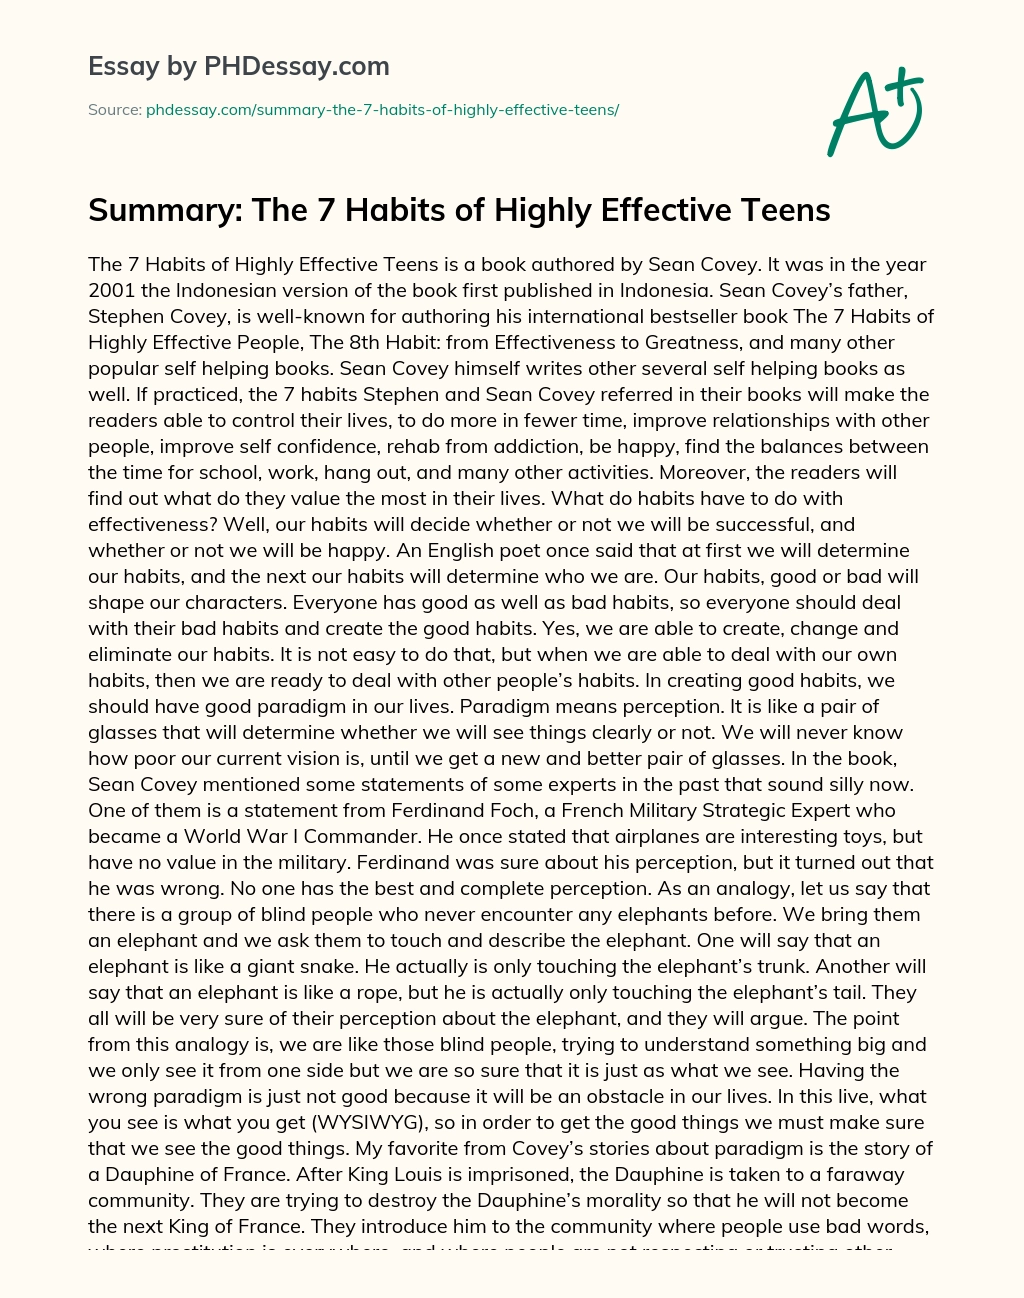 Summary: The 7 Habits of Highly Effective Teens essay